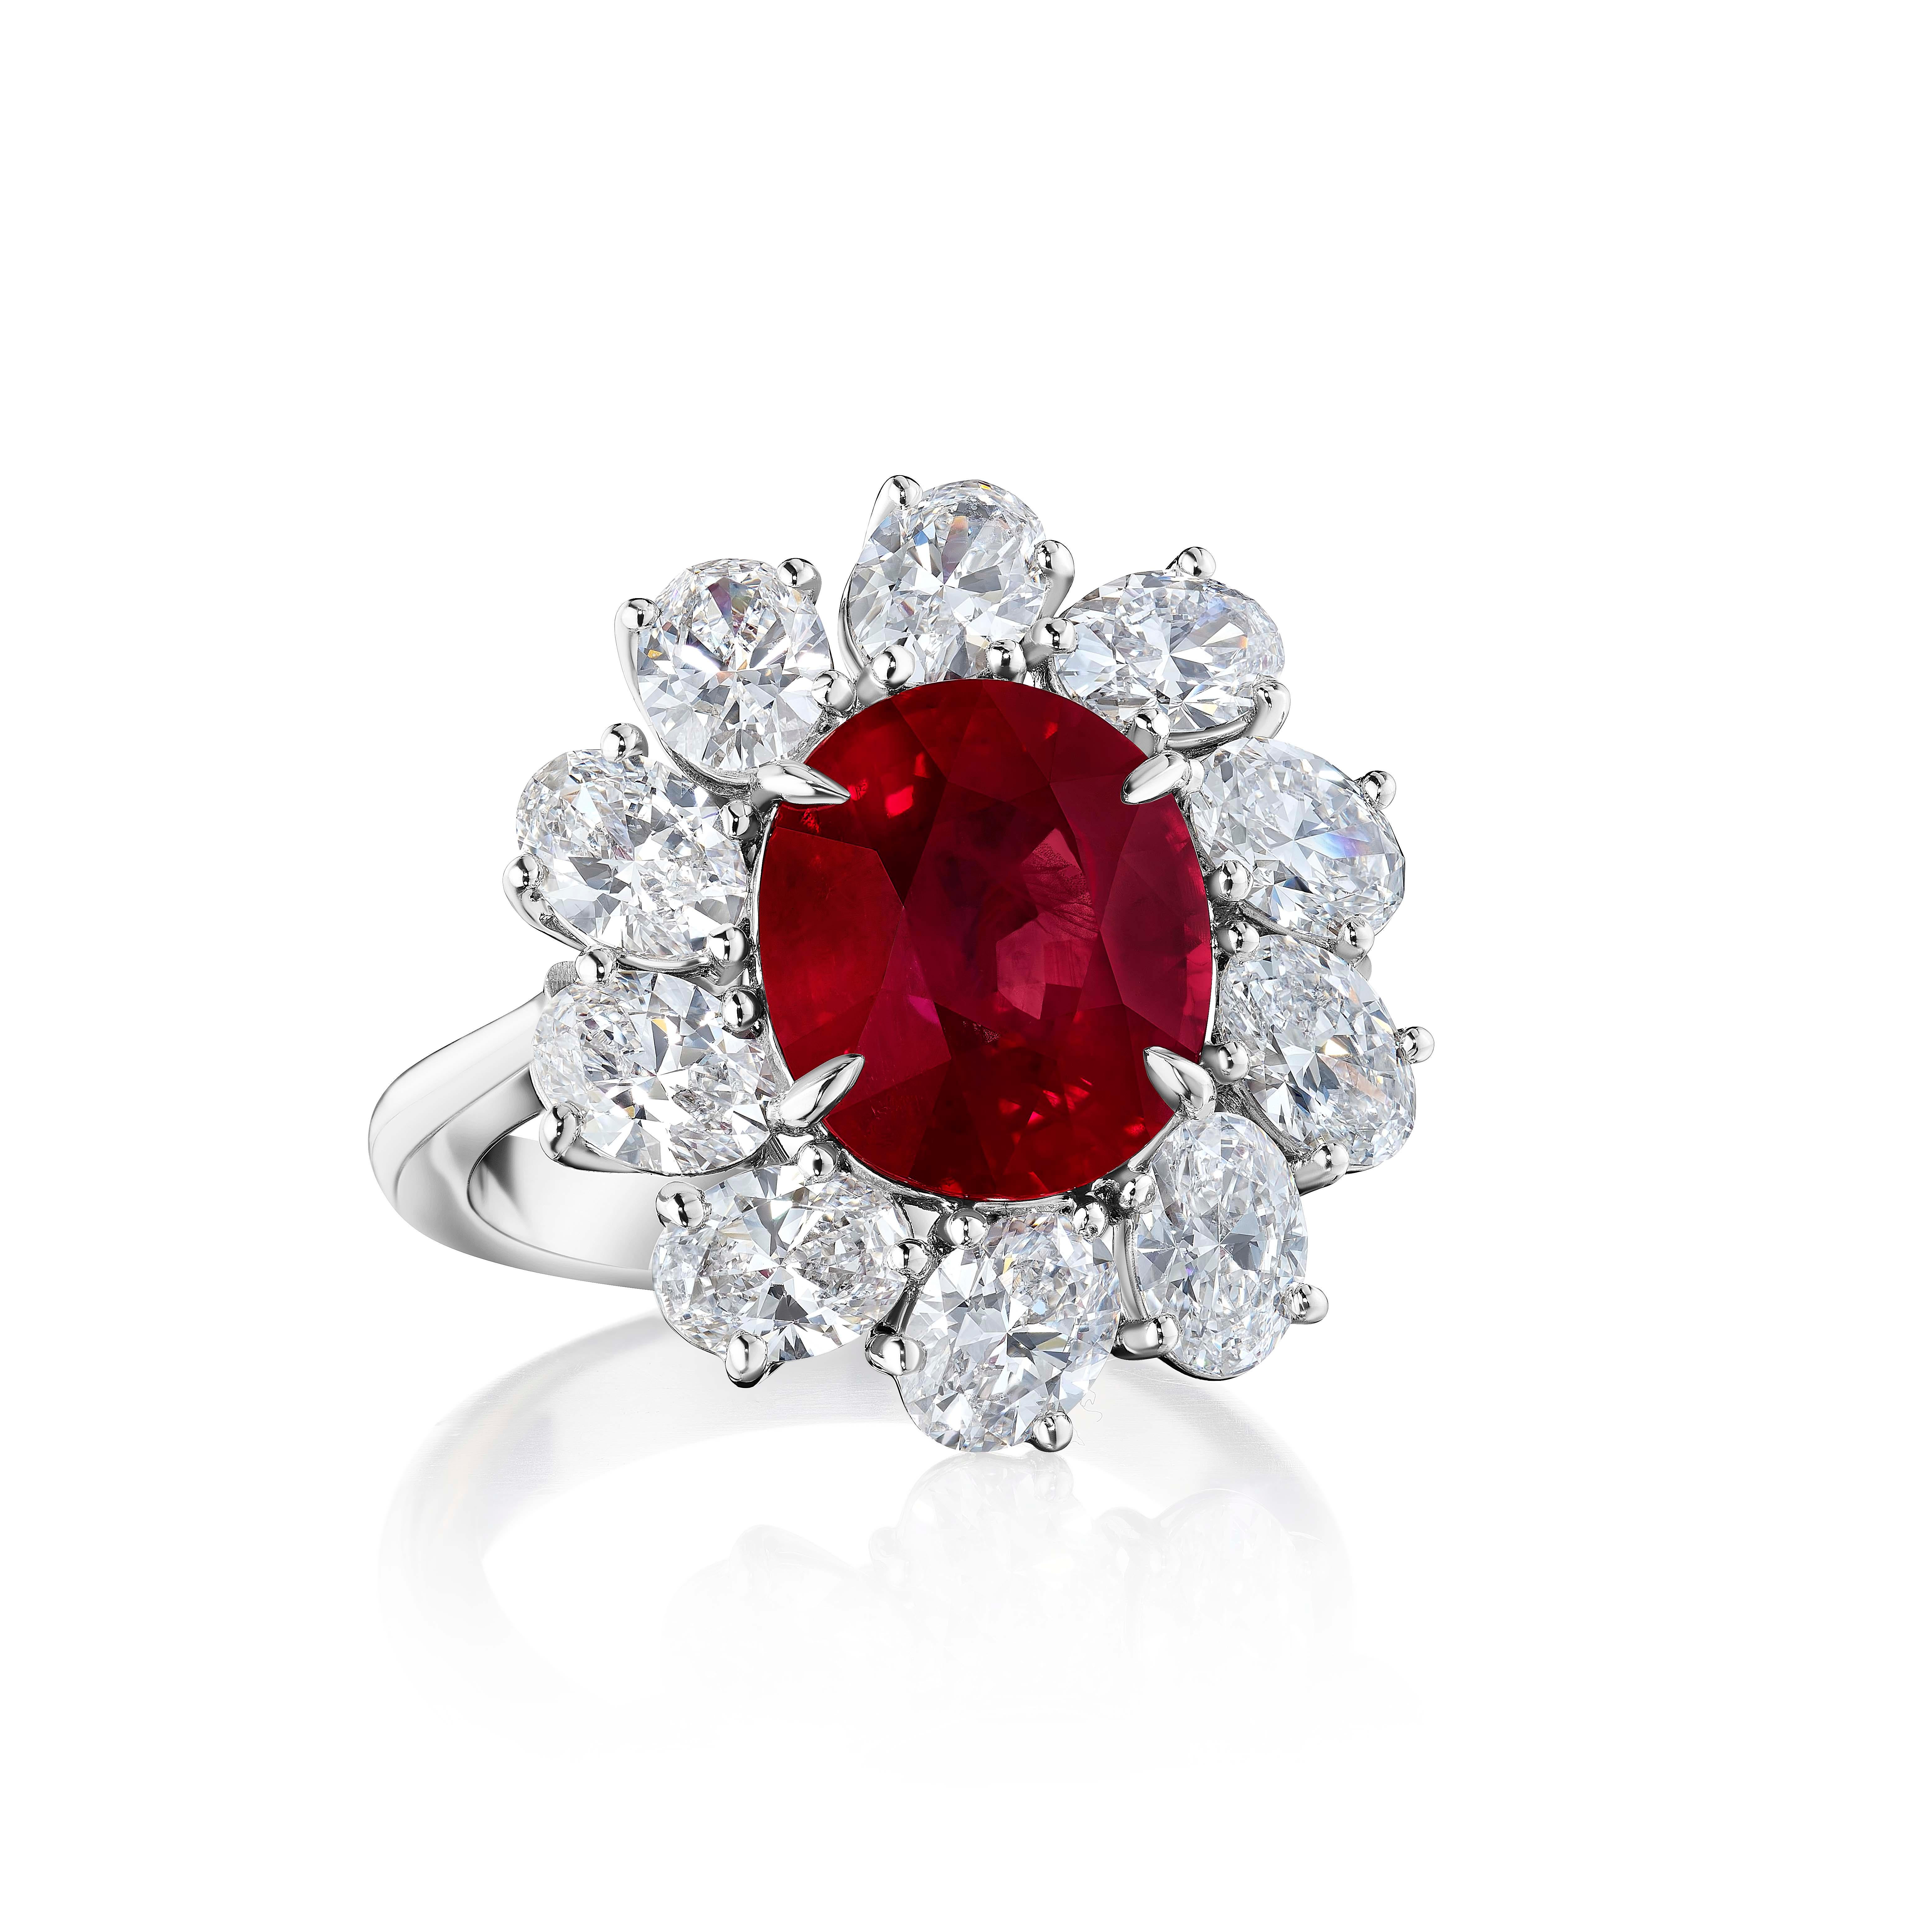 Oval shaped Burmese Ruby surrounded by 10 Oval shaped Diamonds weighing 3.01 Carats.

Ruby certified by GRS as Burma, heated.
Diamonds are all certified as D color and VS+ clarity, by GIA.

Set in Platinum.